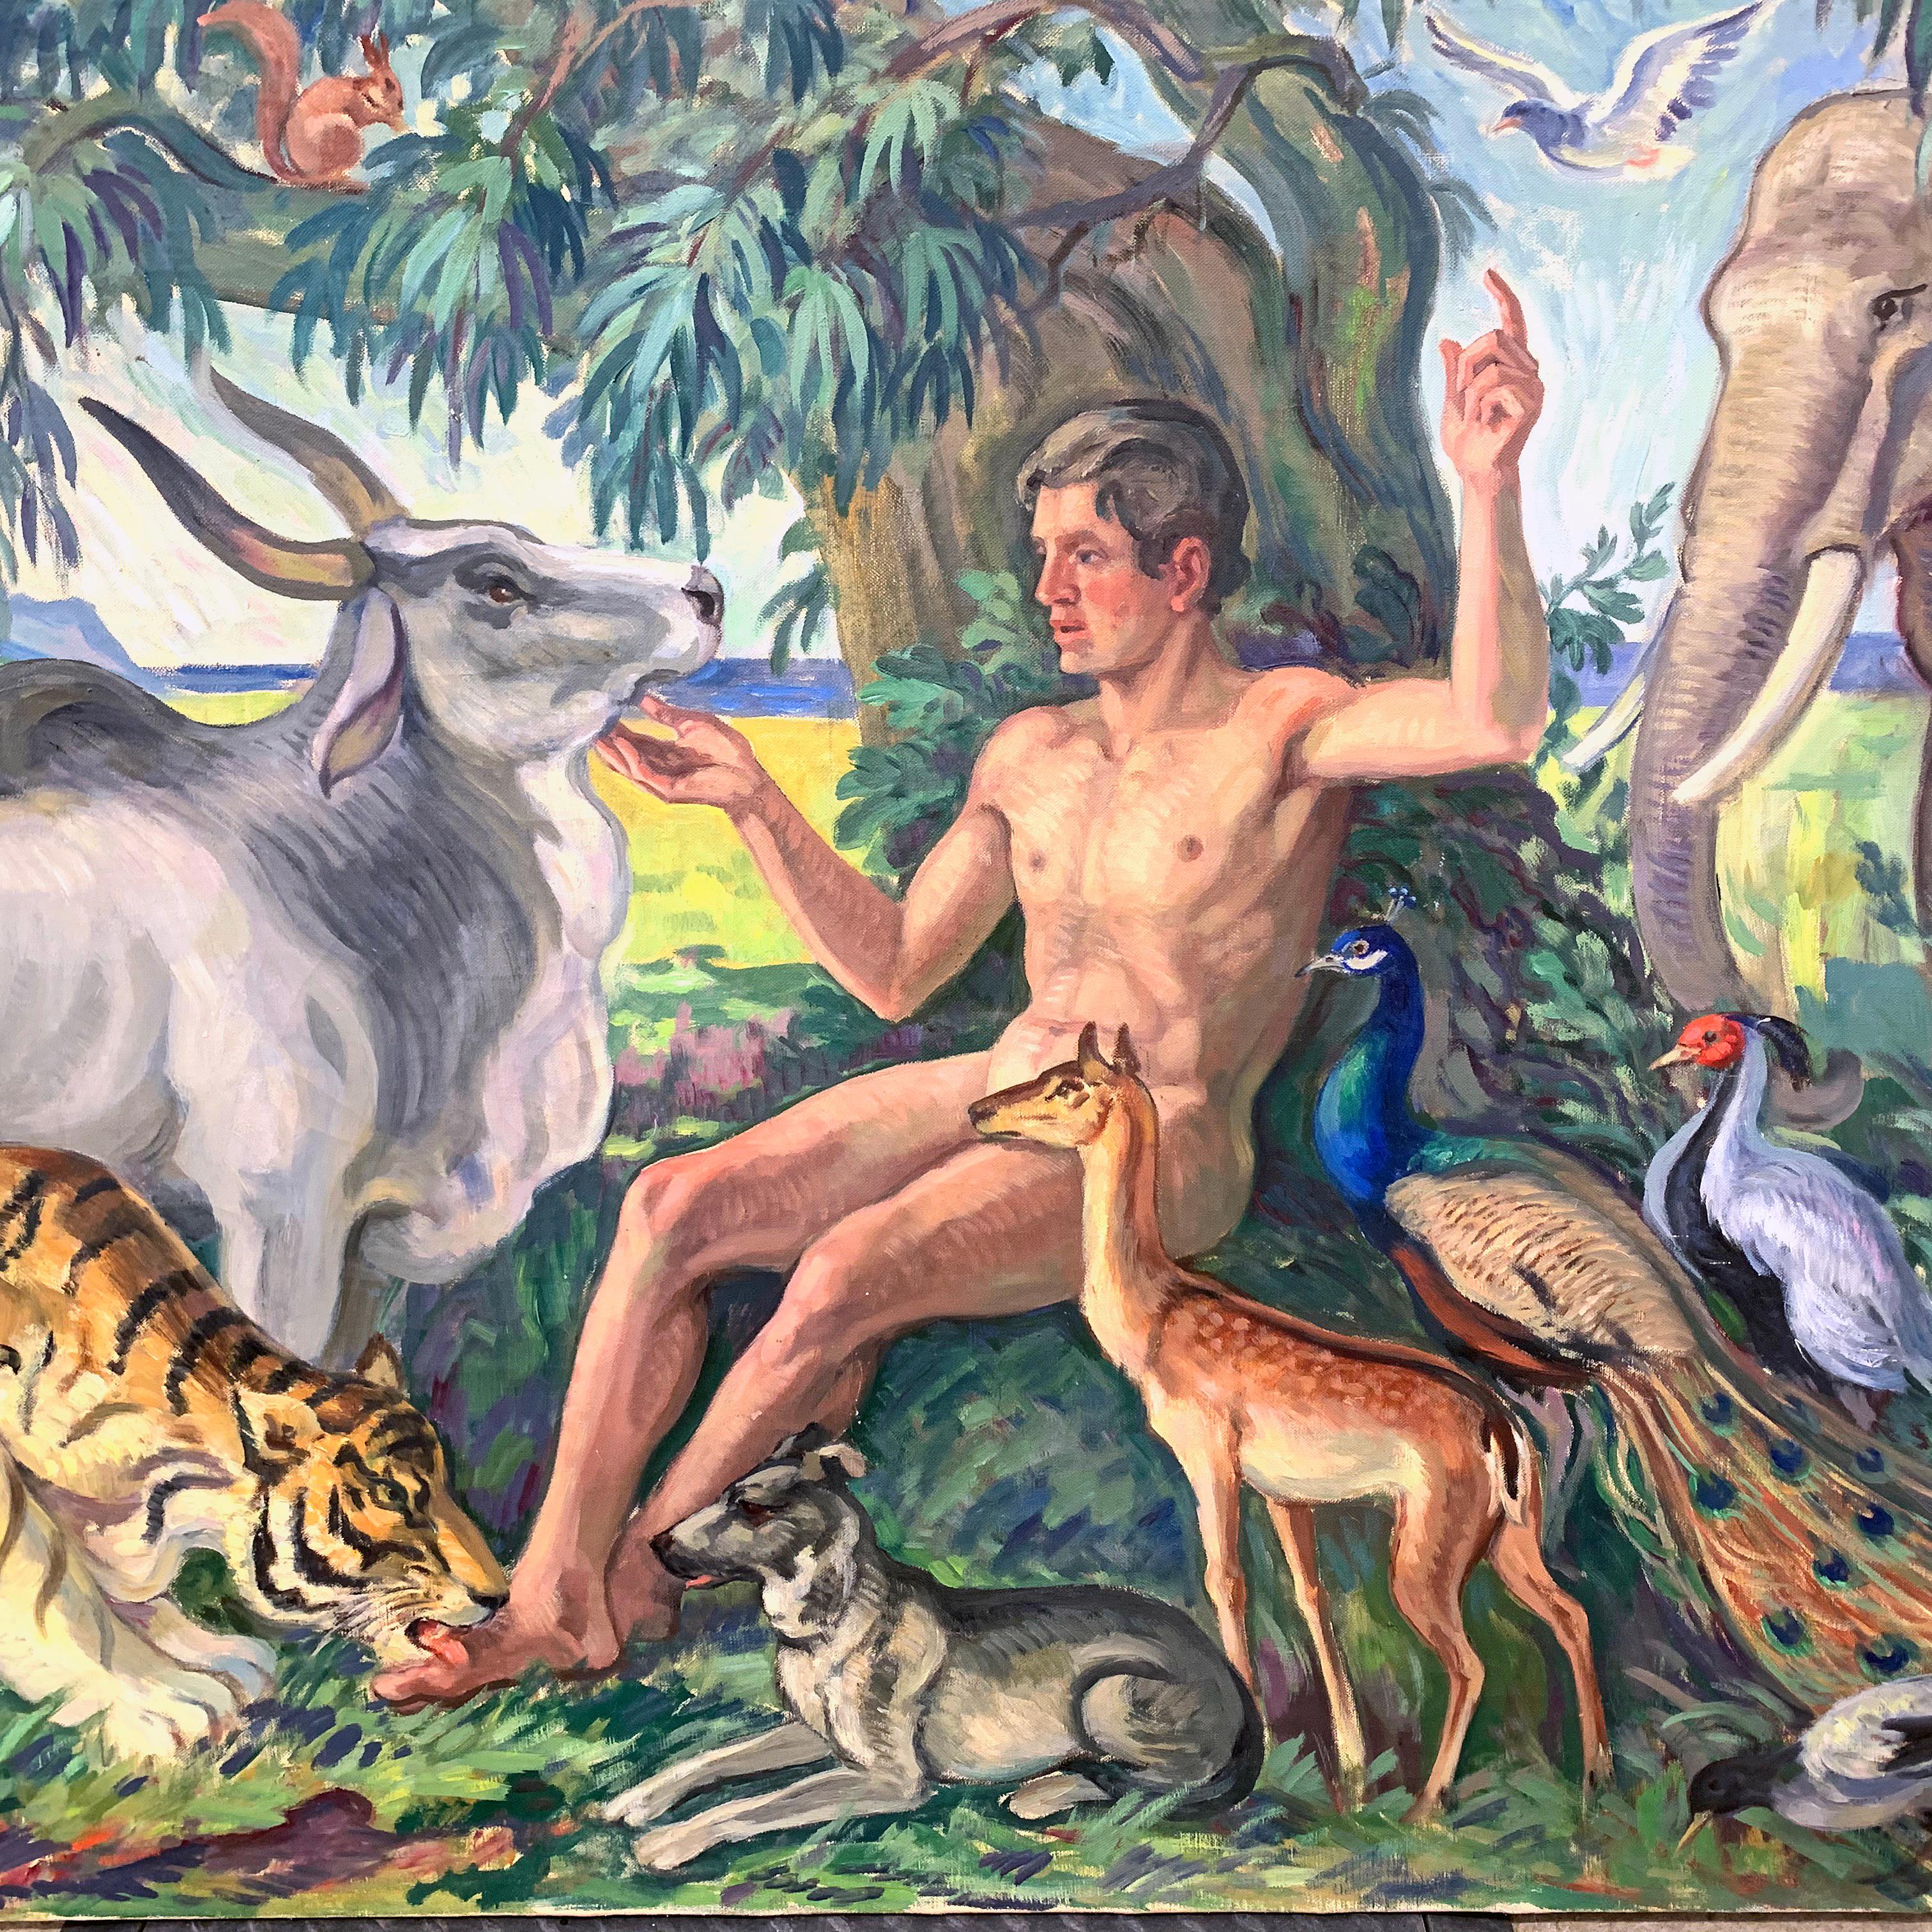 A remarkable statement of hope and resilience, this vivid and colorful depiction of a nude Adam seated amidst a profusion of flora and fauna was painted in the midst of World War II when Denmark was occupied by the Nazis and the end of the war was